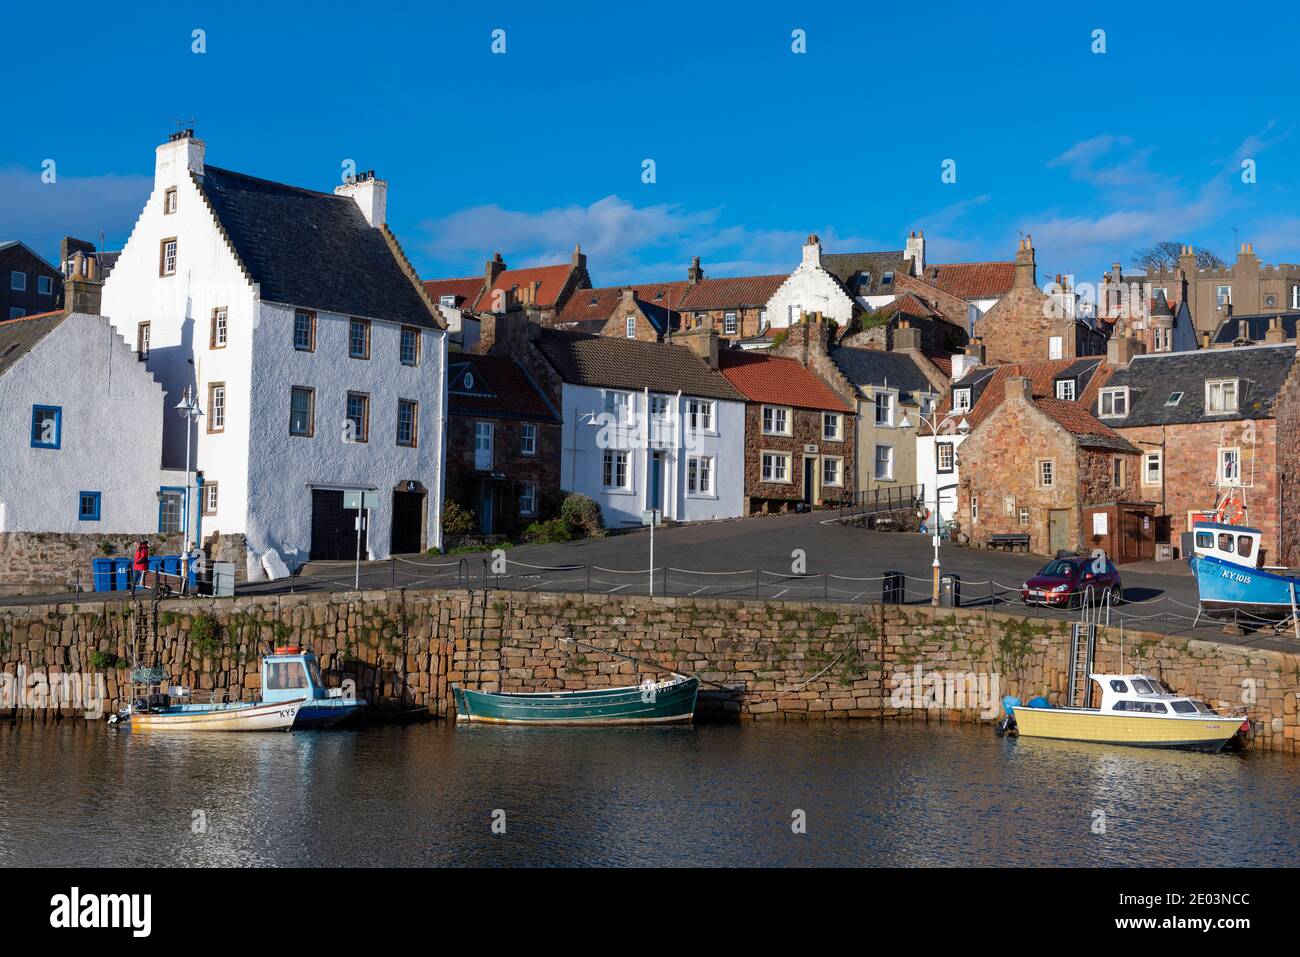 This is Crail harbour in the county of Fife, Scotland, UK. This area of Fife is known as the East Neuk of Fife. Stock Photo